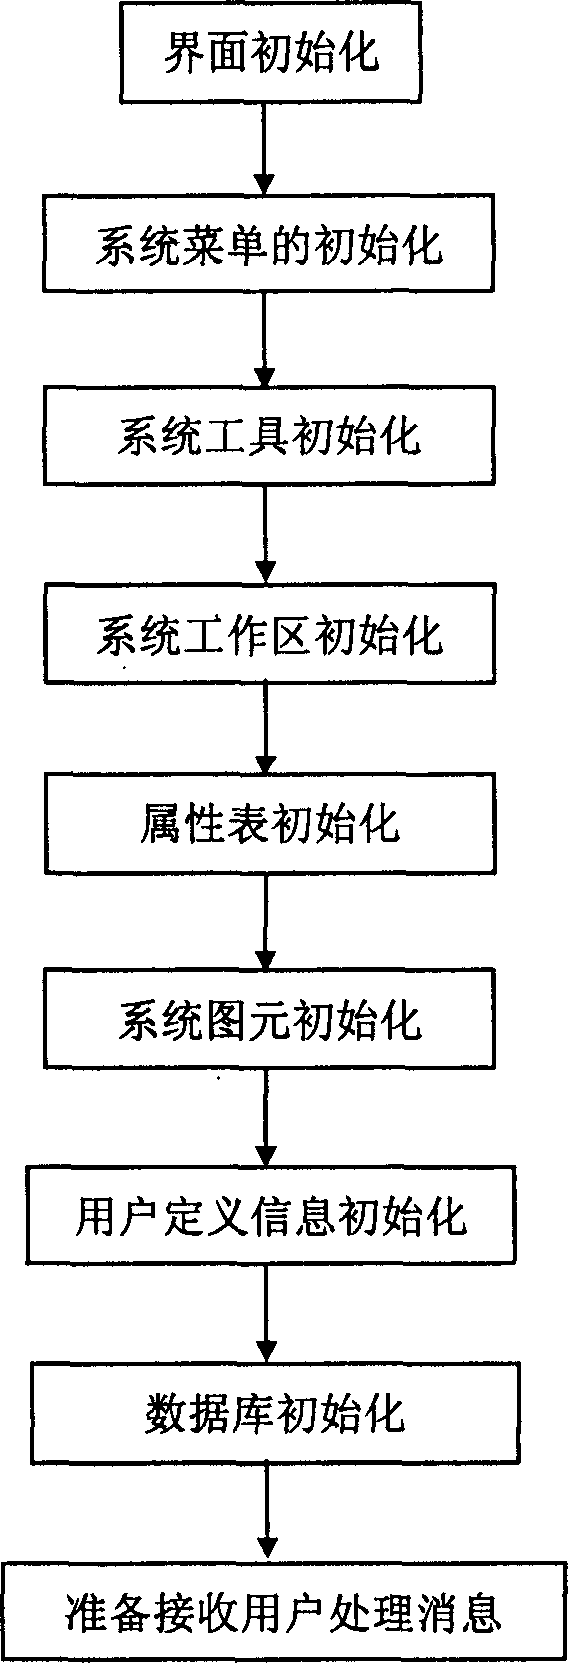 System and equipment for collecting and monitoring data of electric power